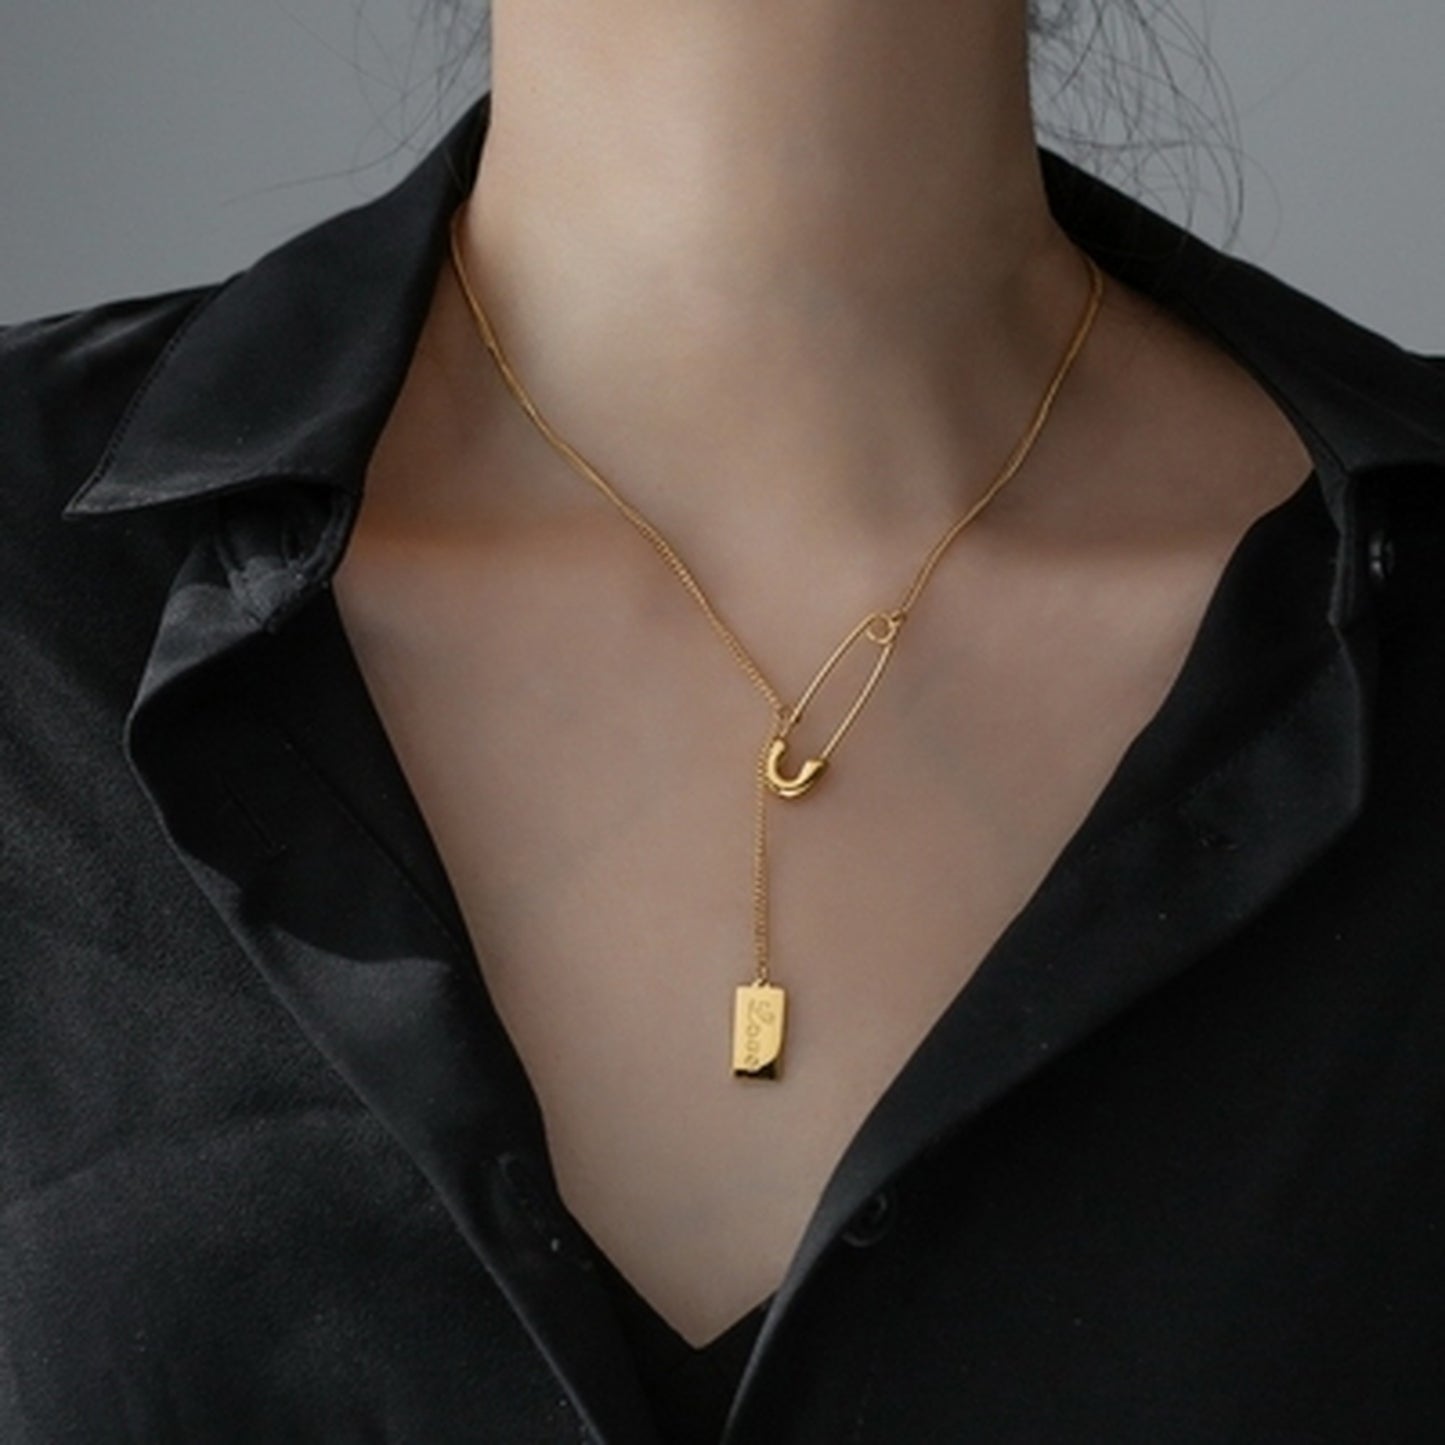 gold safety pin necklace 5746